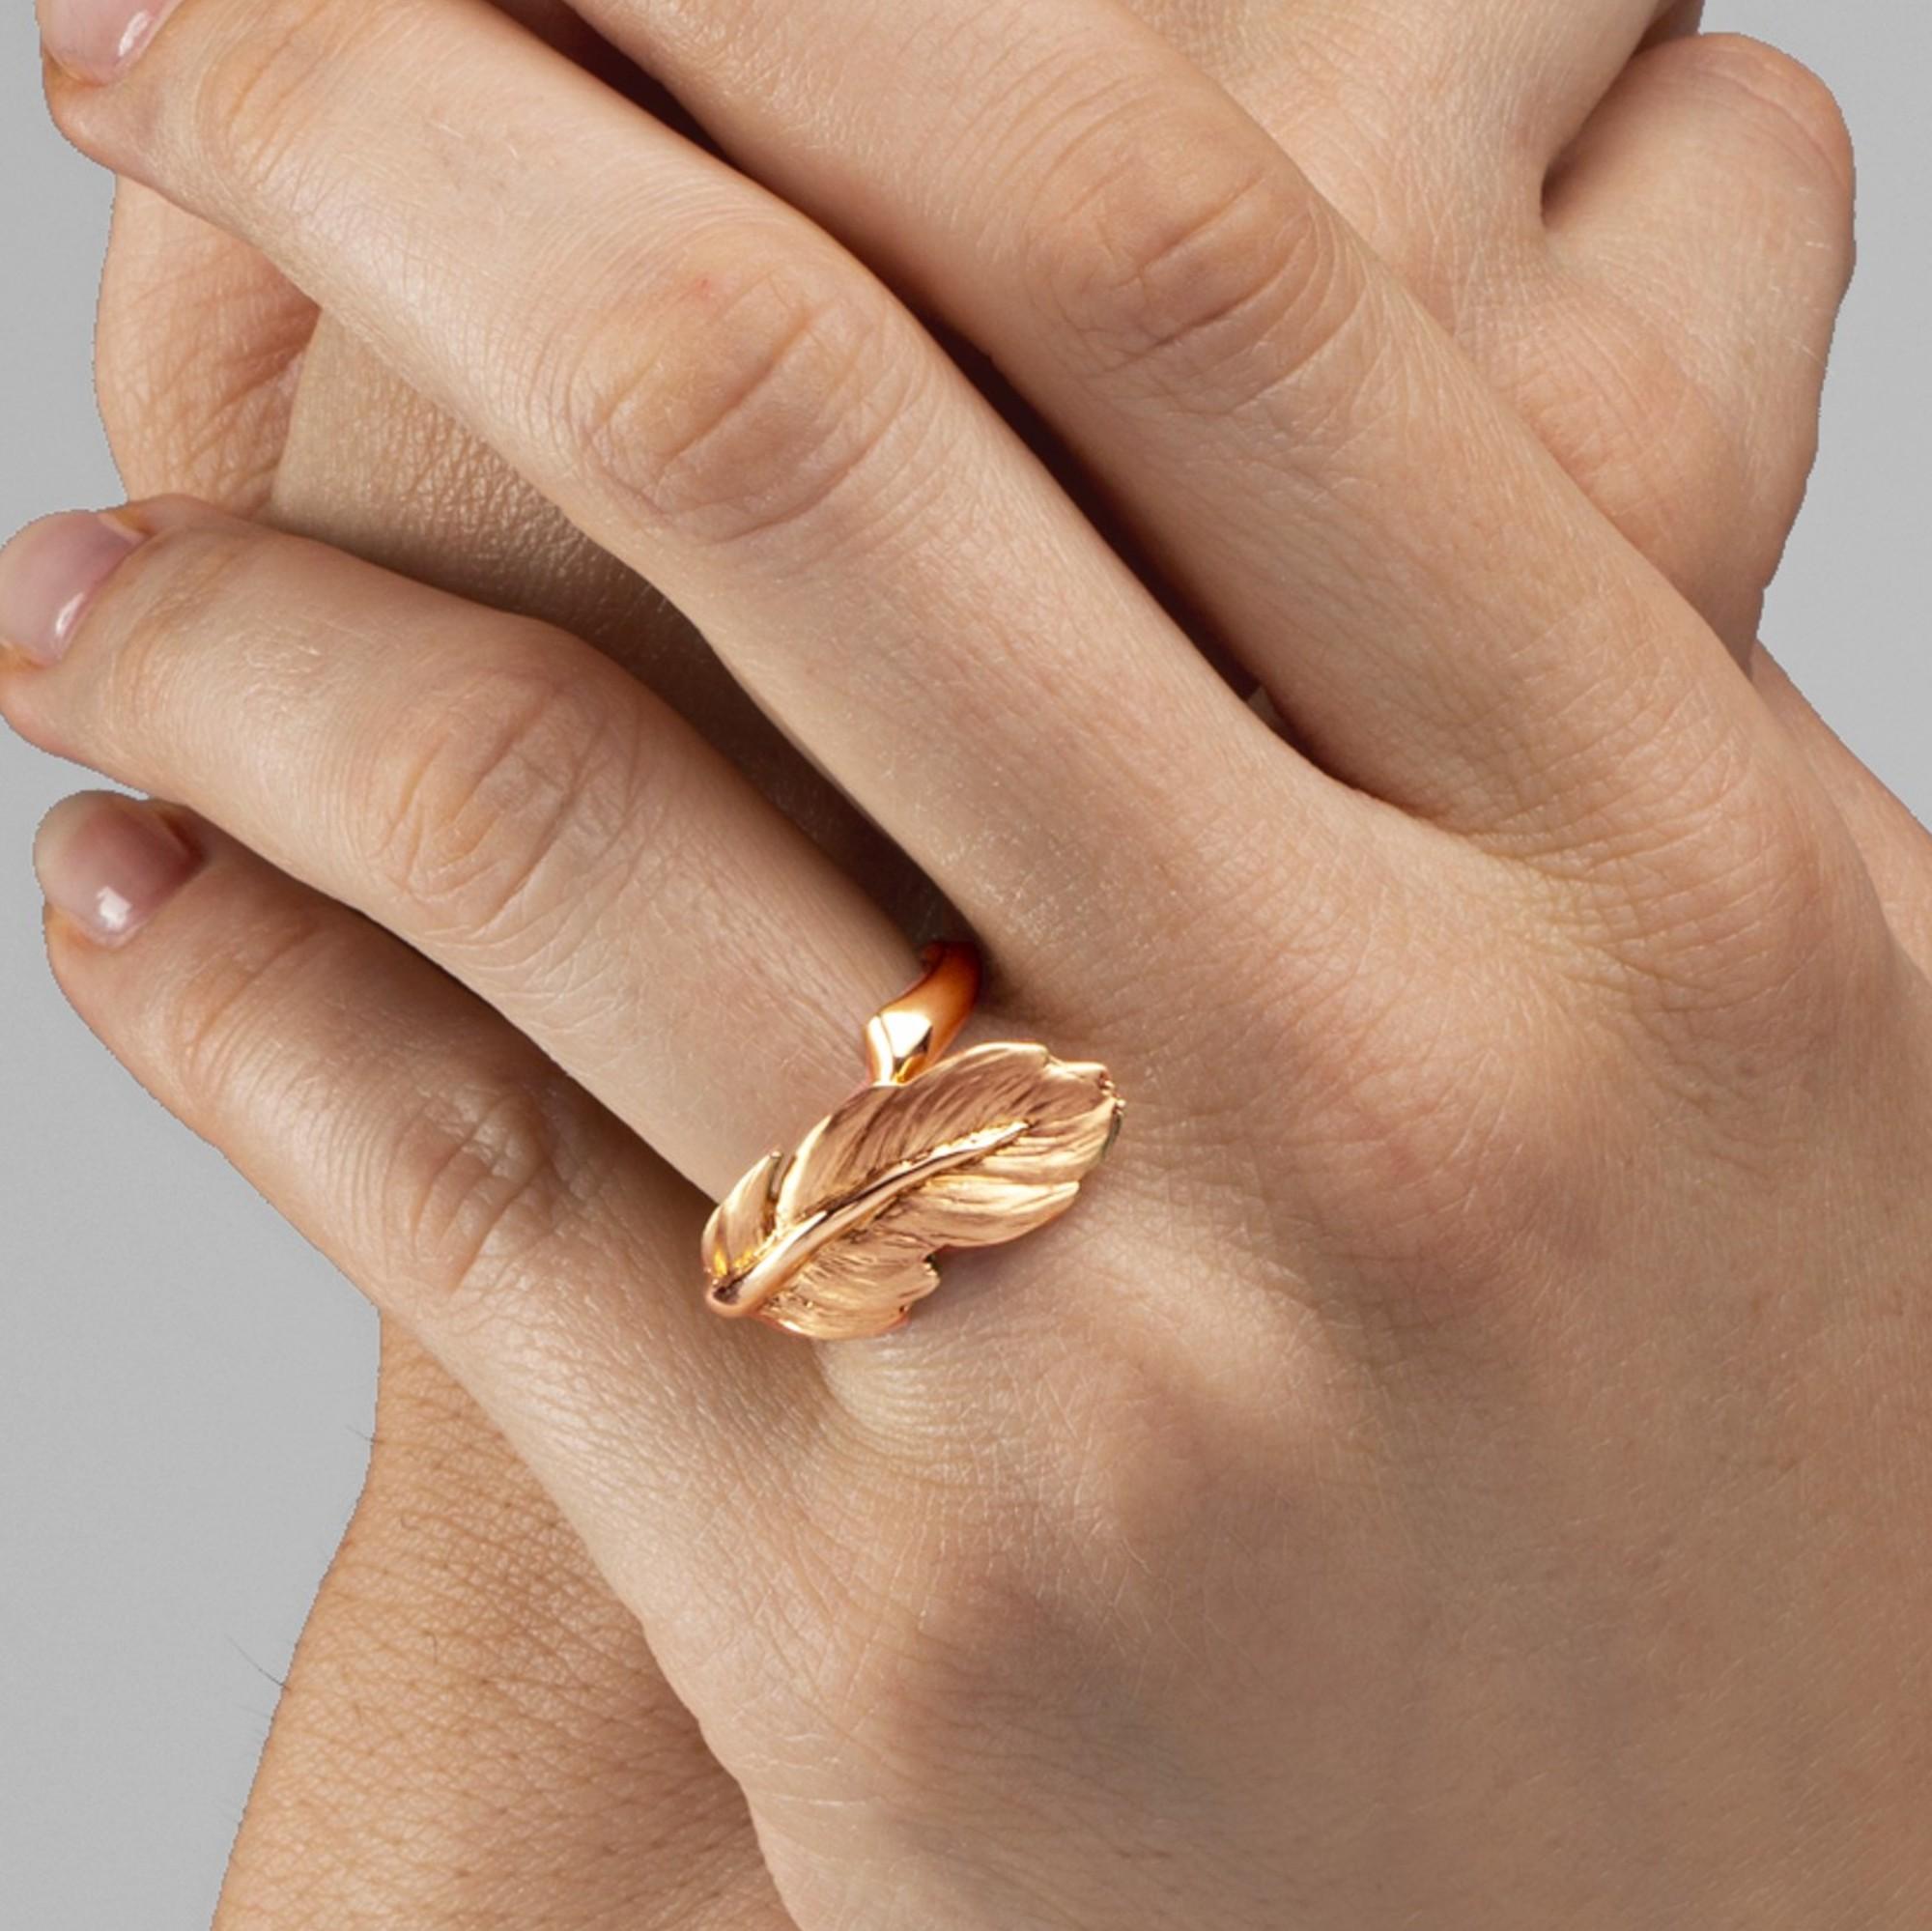 Alex Jona design collection, hand crafted in Italy, 18 karat rose gold feather ring.
Size US 6.5, can be sized to any specification. Also beautiful as a pinkie finger ring.
Alex Jona jewels stand out, not only for their special design and for the